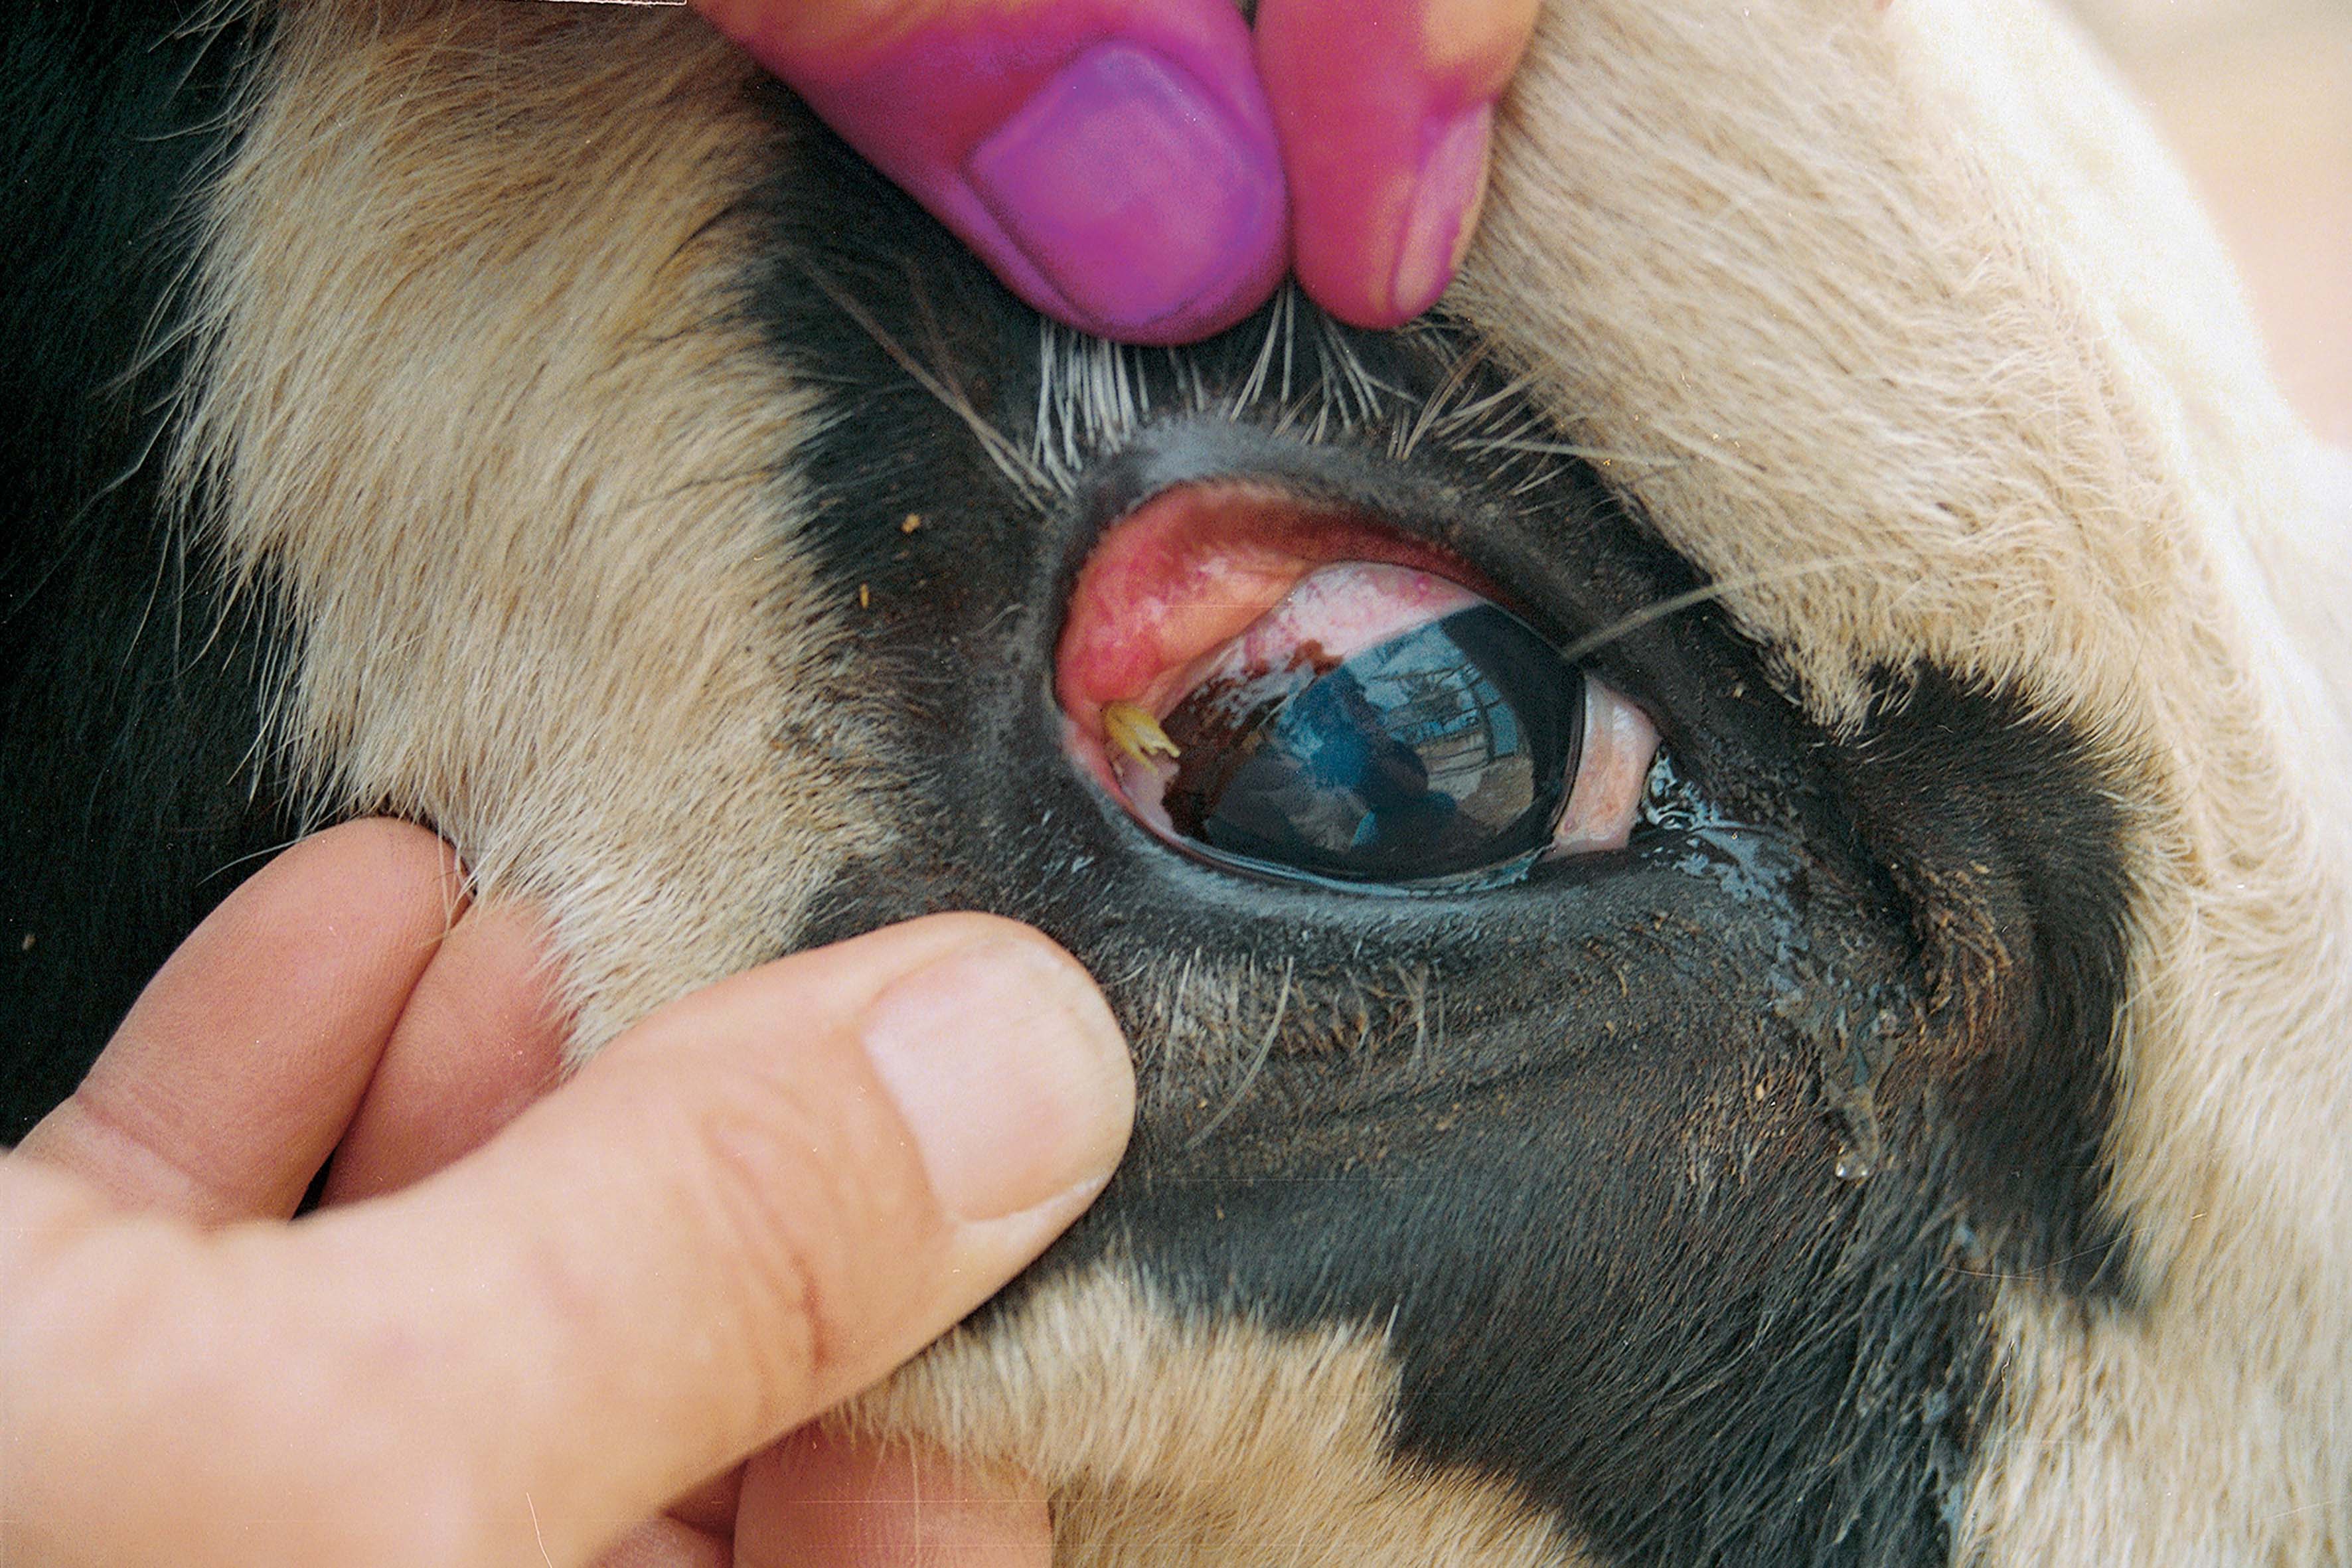 Pinkeye caused from physical irritation from grass seed